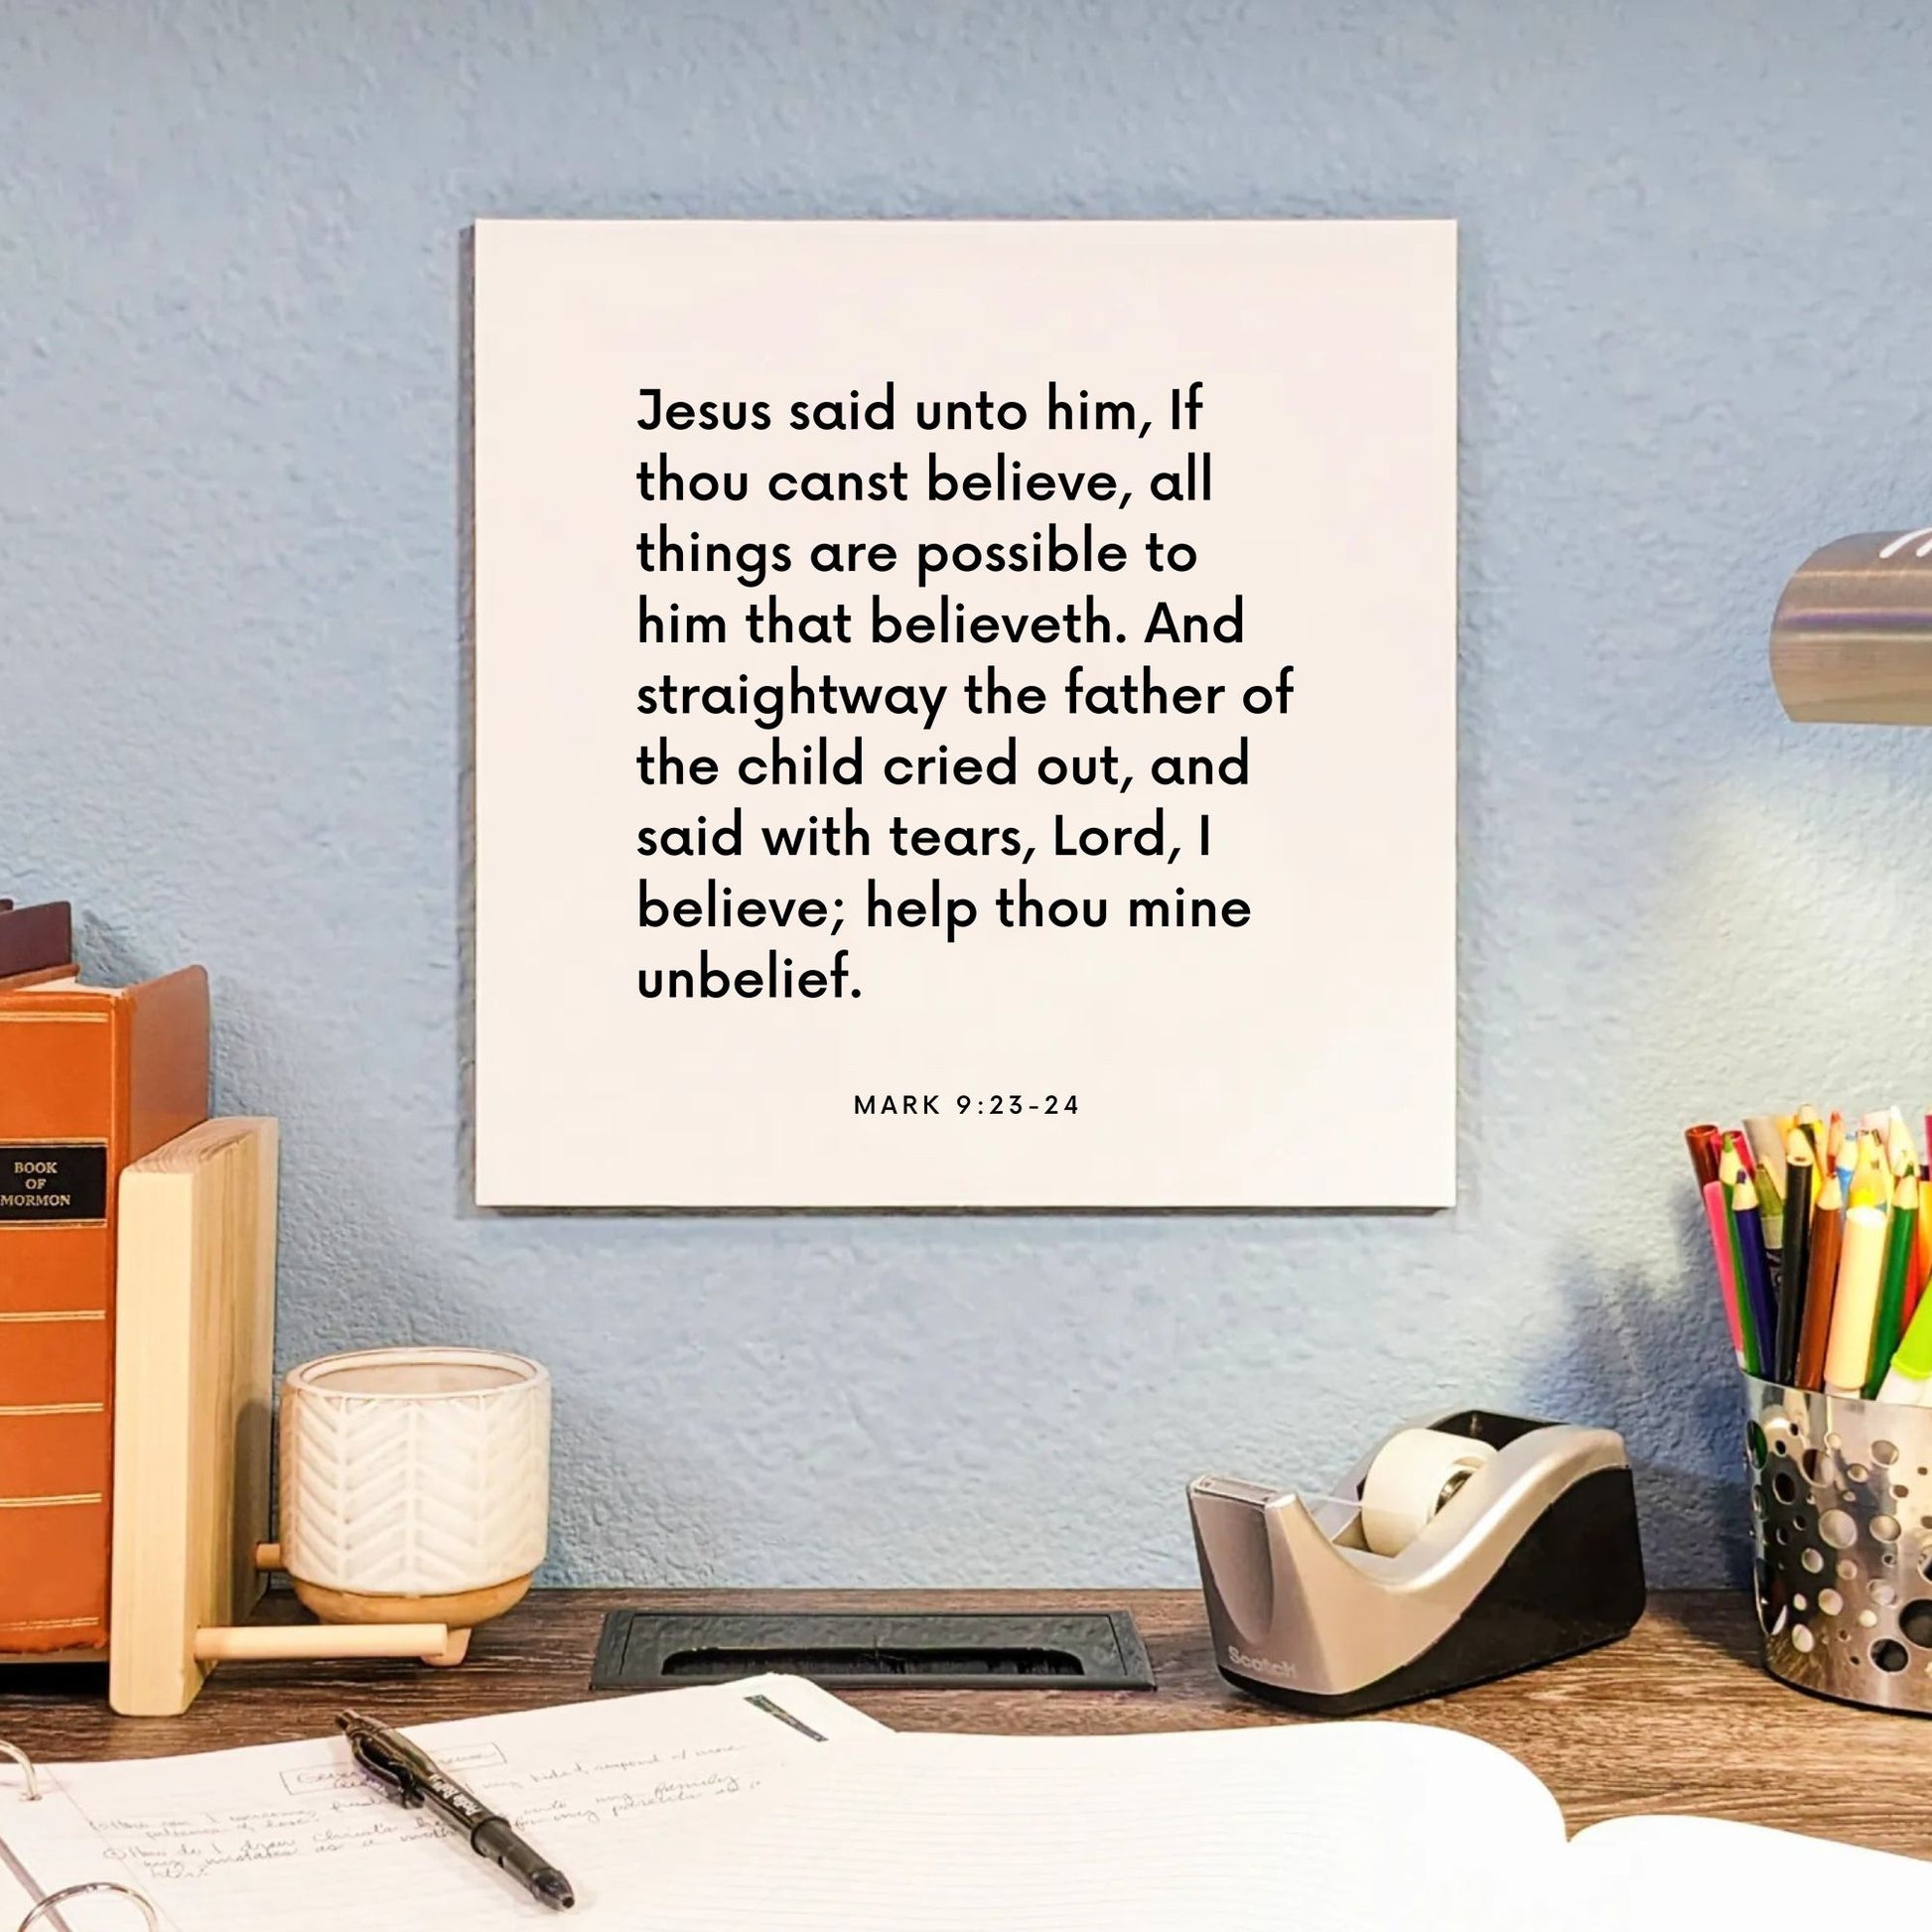 Desk mouting of the scripture tile for Mark 9:23-24 - "Lord, I believe; help thou mine unbelief"